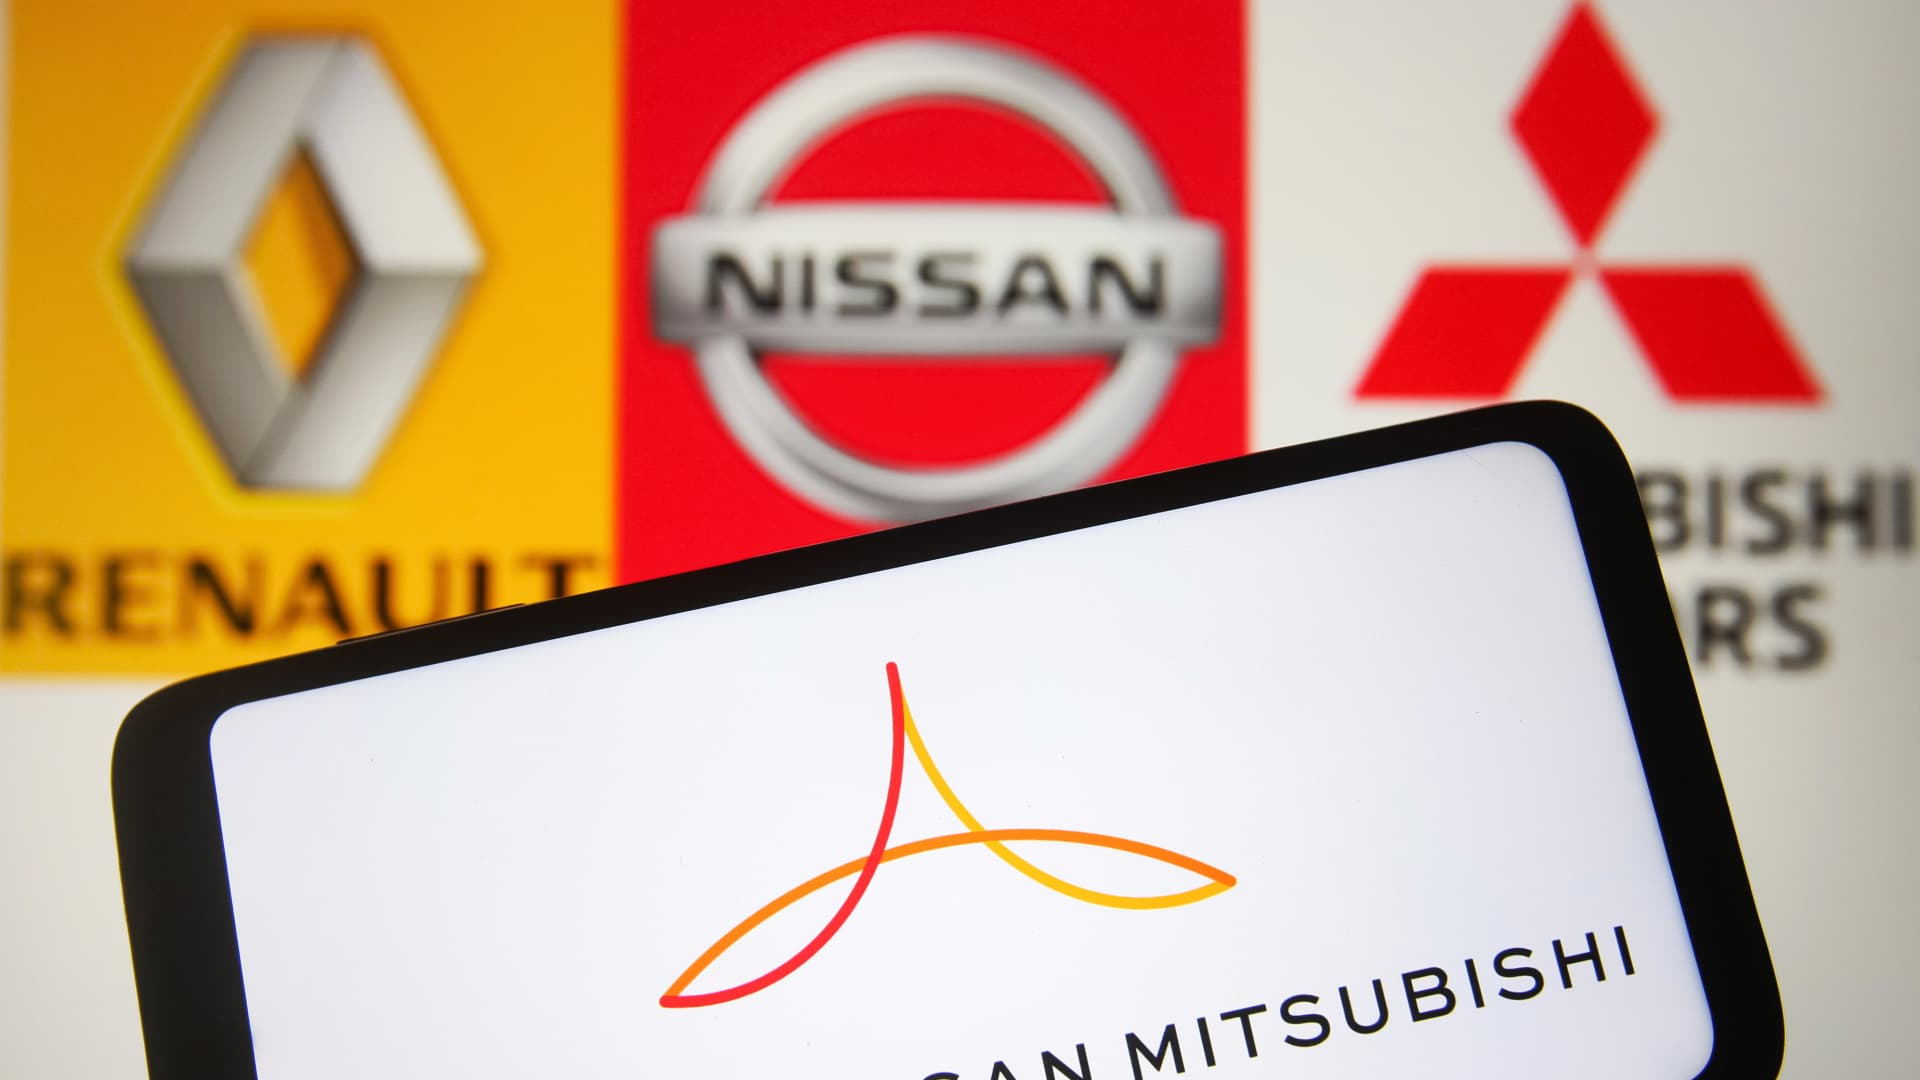 Nissan to buy up to 15% stake in Renault EV unit under reshaped alliance